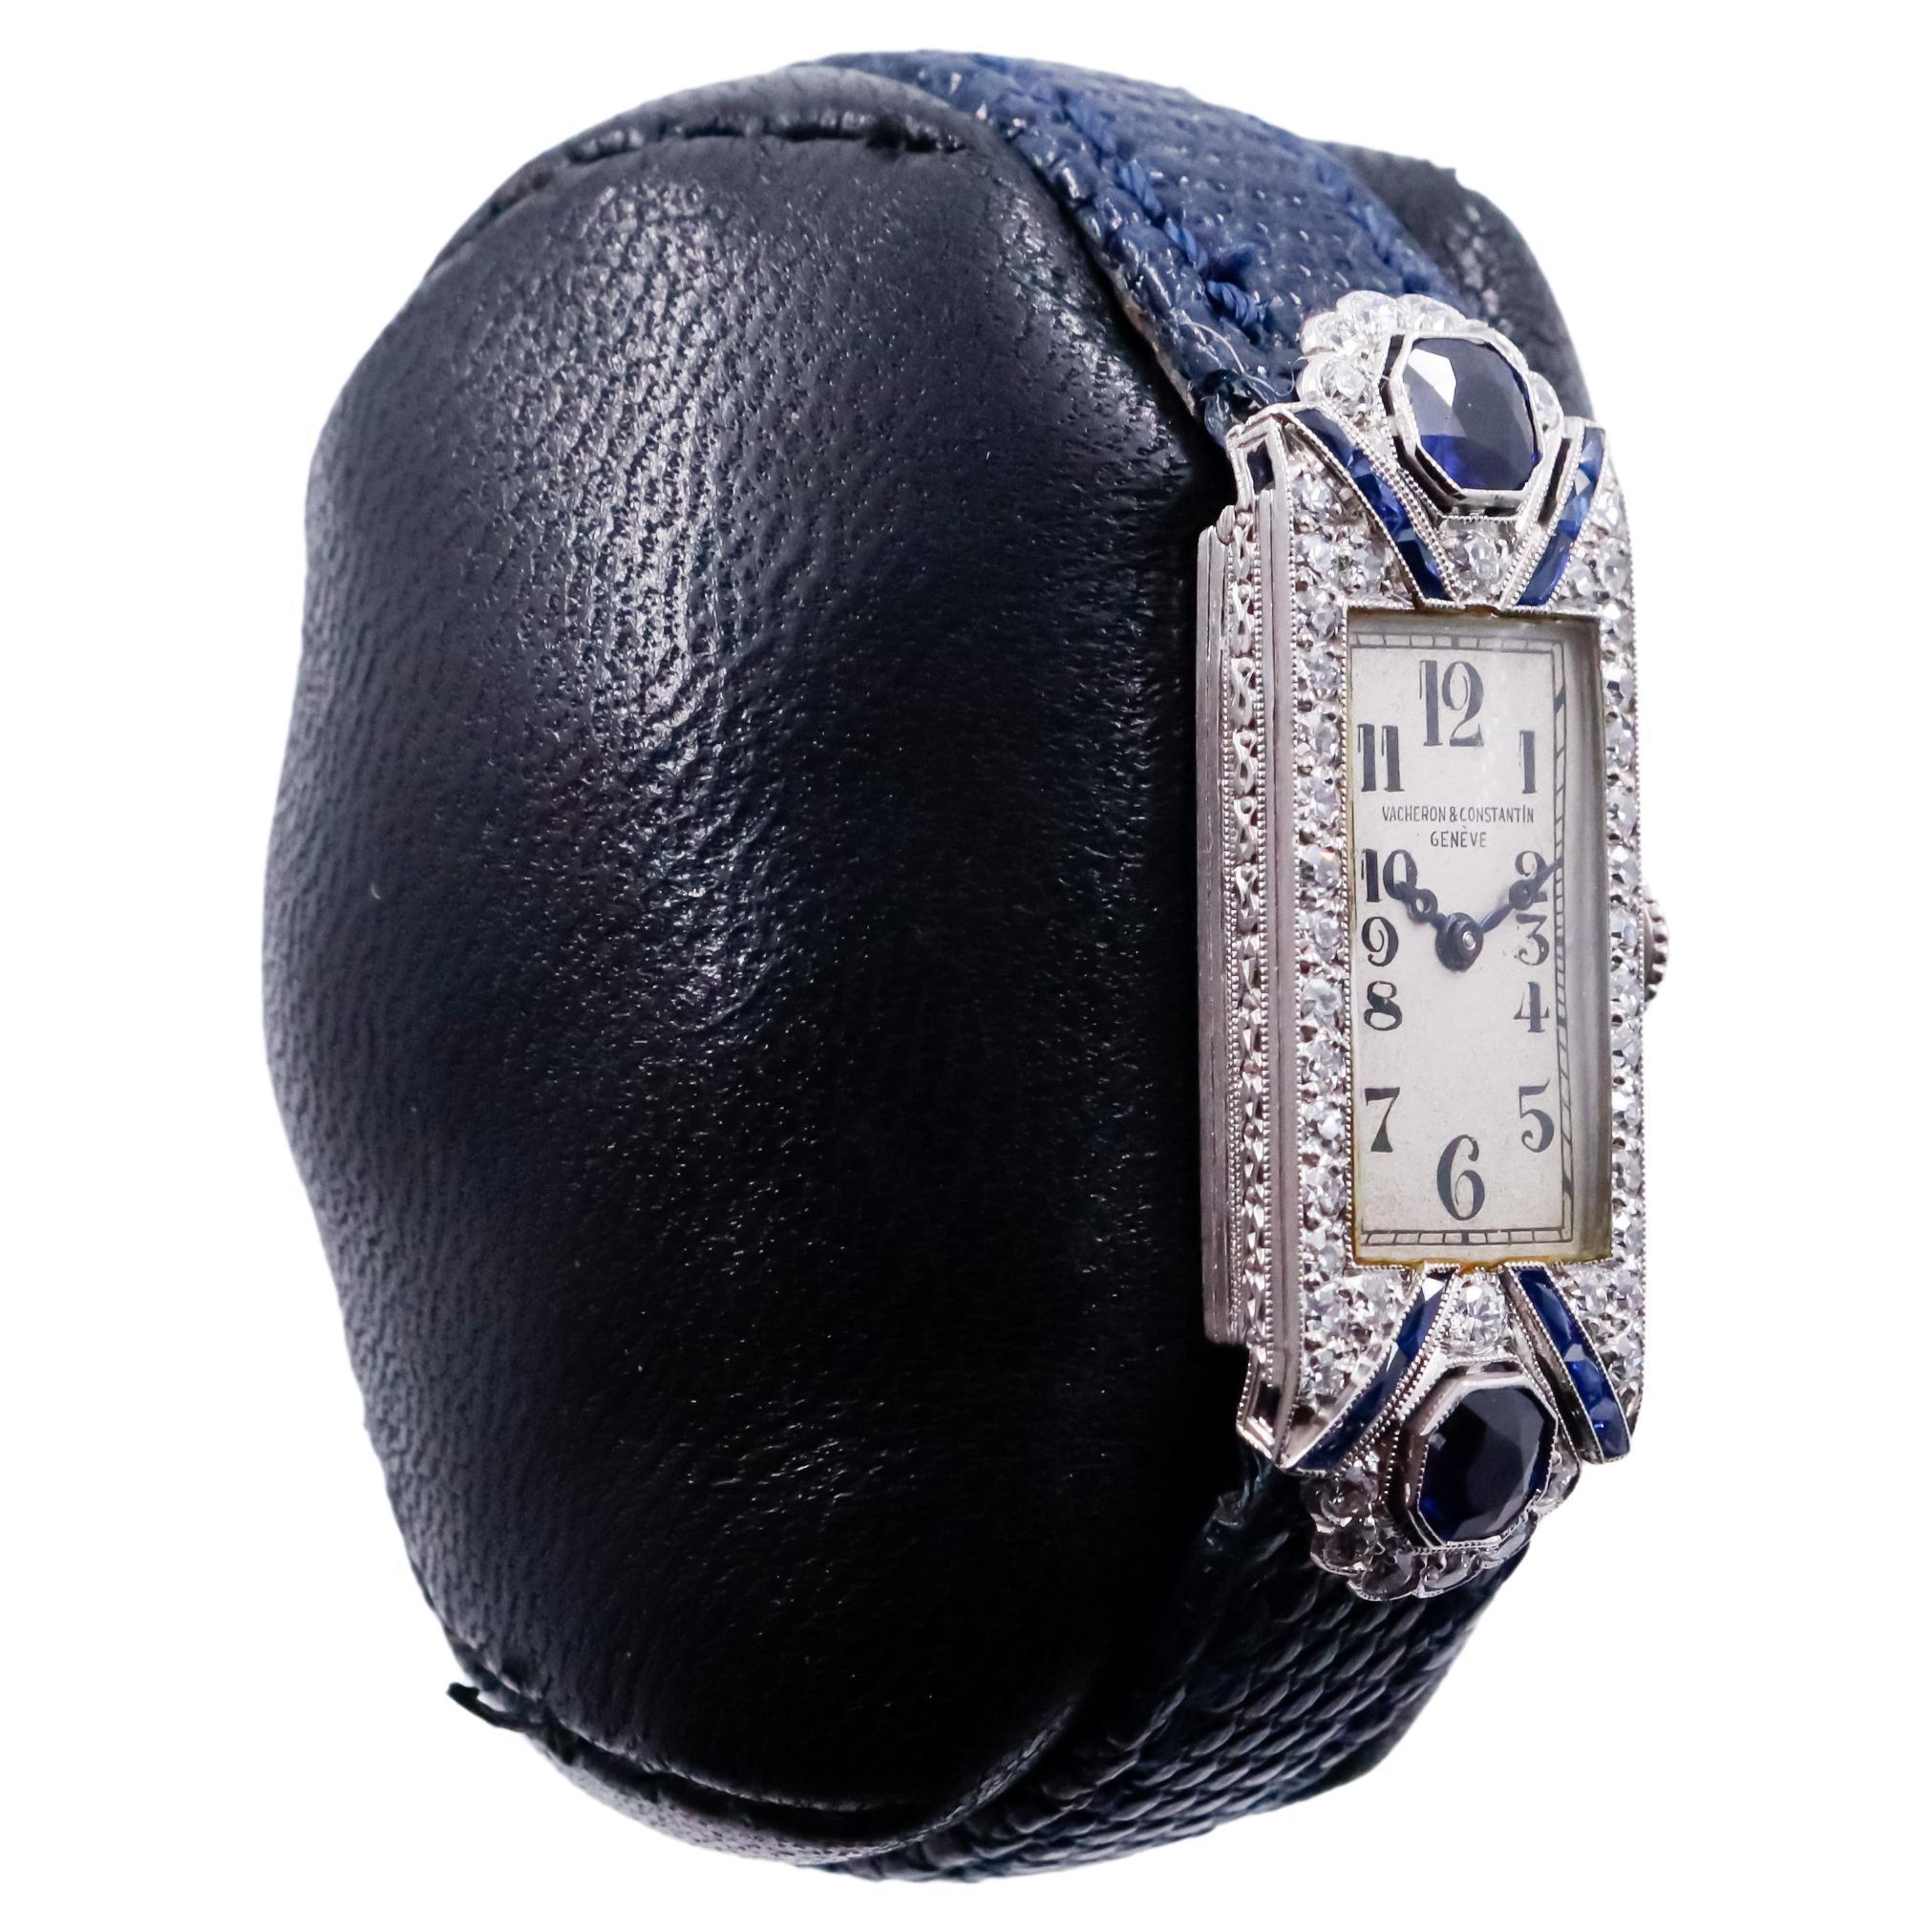 FACTORY / HOUSE: Vacheron Constantin for Merimont
STYLE / REFERENCE: Art Deco / Dress Watch
METAL / MATERIAL: Platinum Diamond Sapphires
CIRCA / YEAR: 1920's
DIMENSIONS / SIZE:  Length 39mm X Width 14mm
MOVEMENT / CALIBER: Manual Winding / 18 Jewels